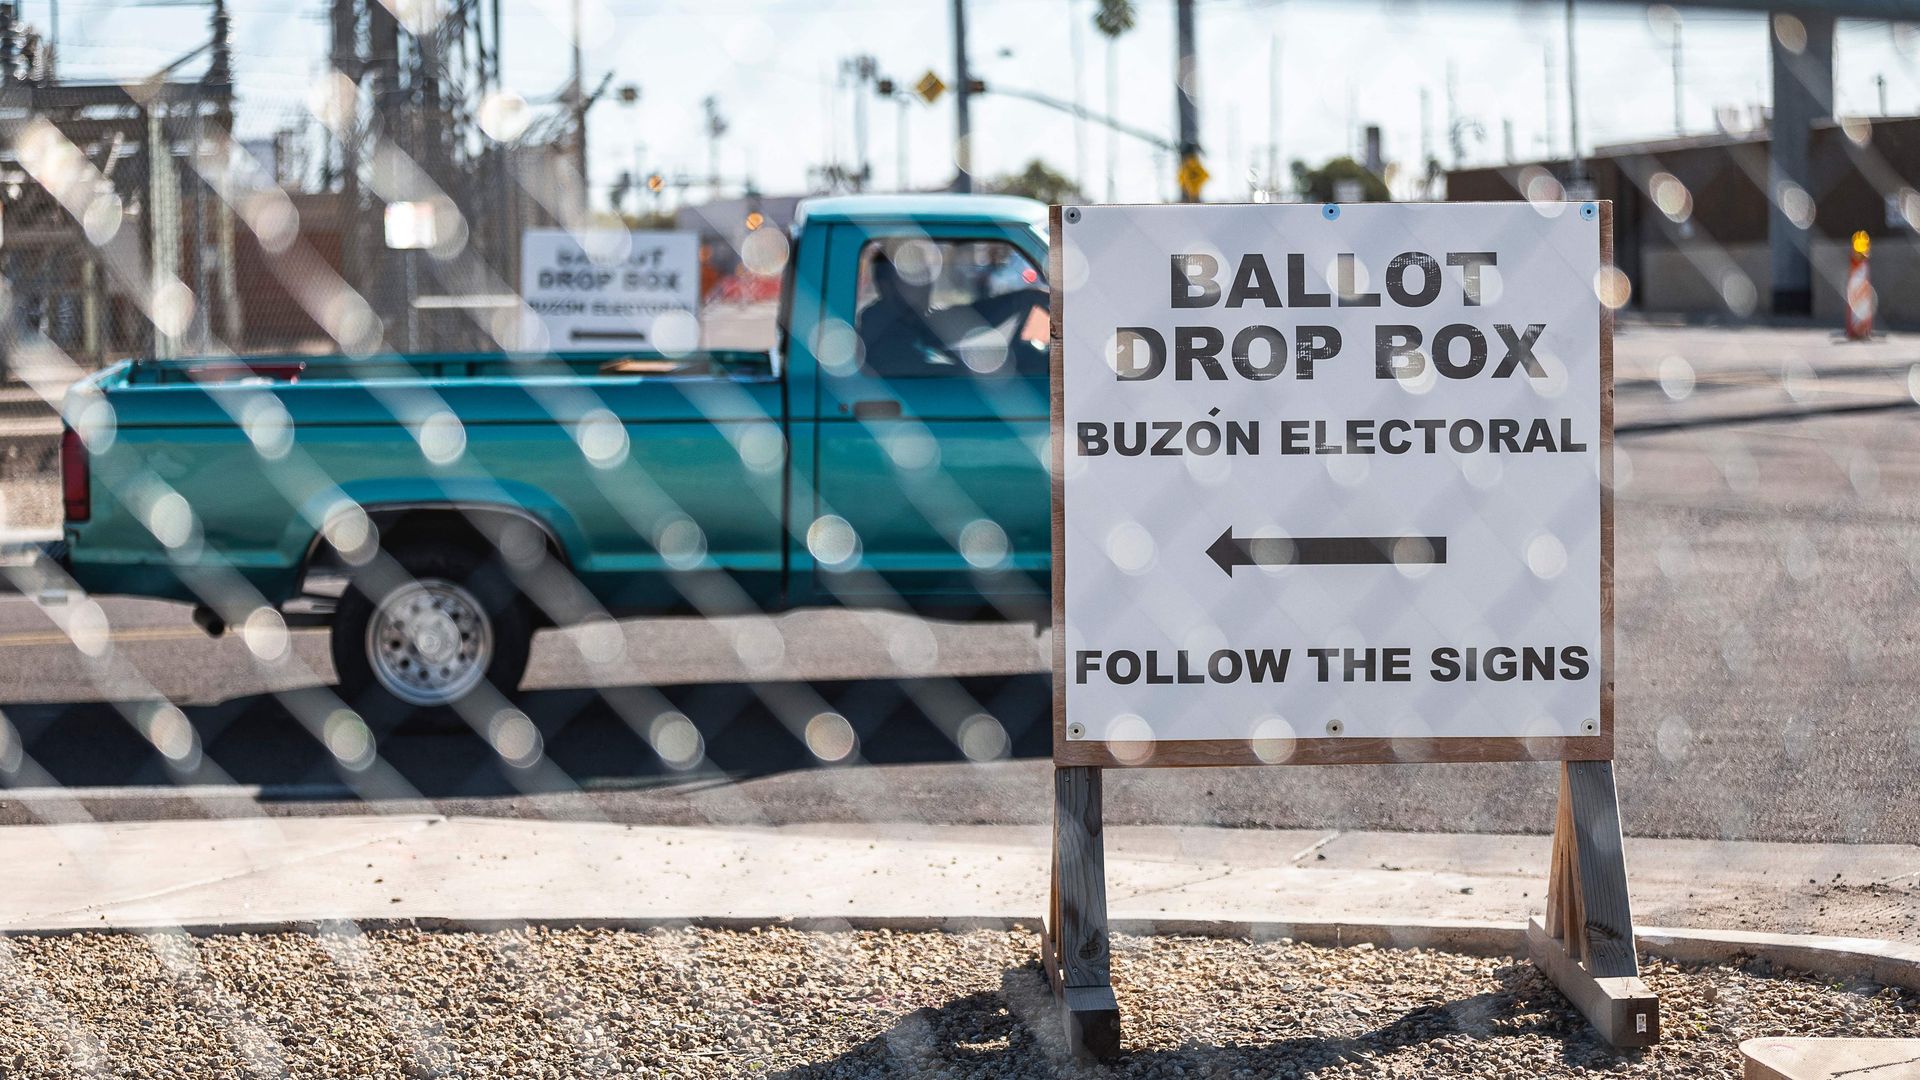 Photo of a sign indicating the location of the ballot drop box behind a fence